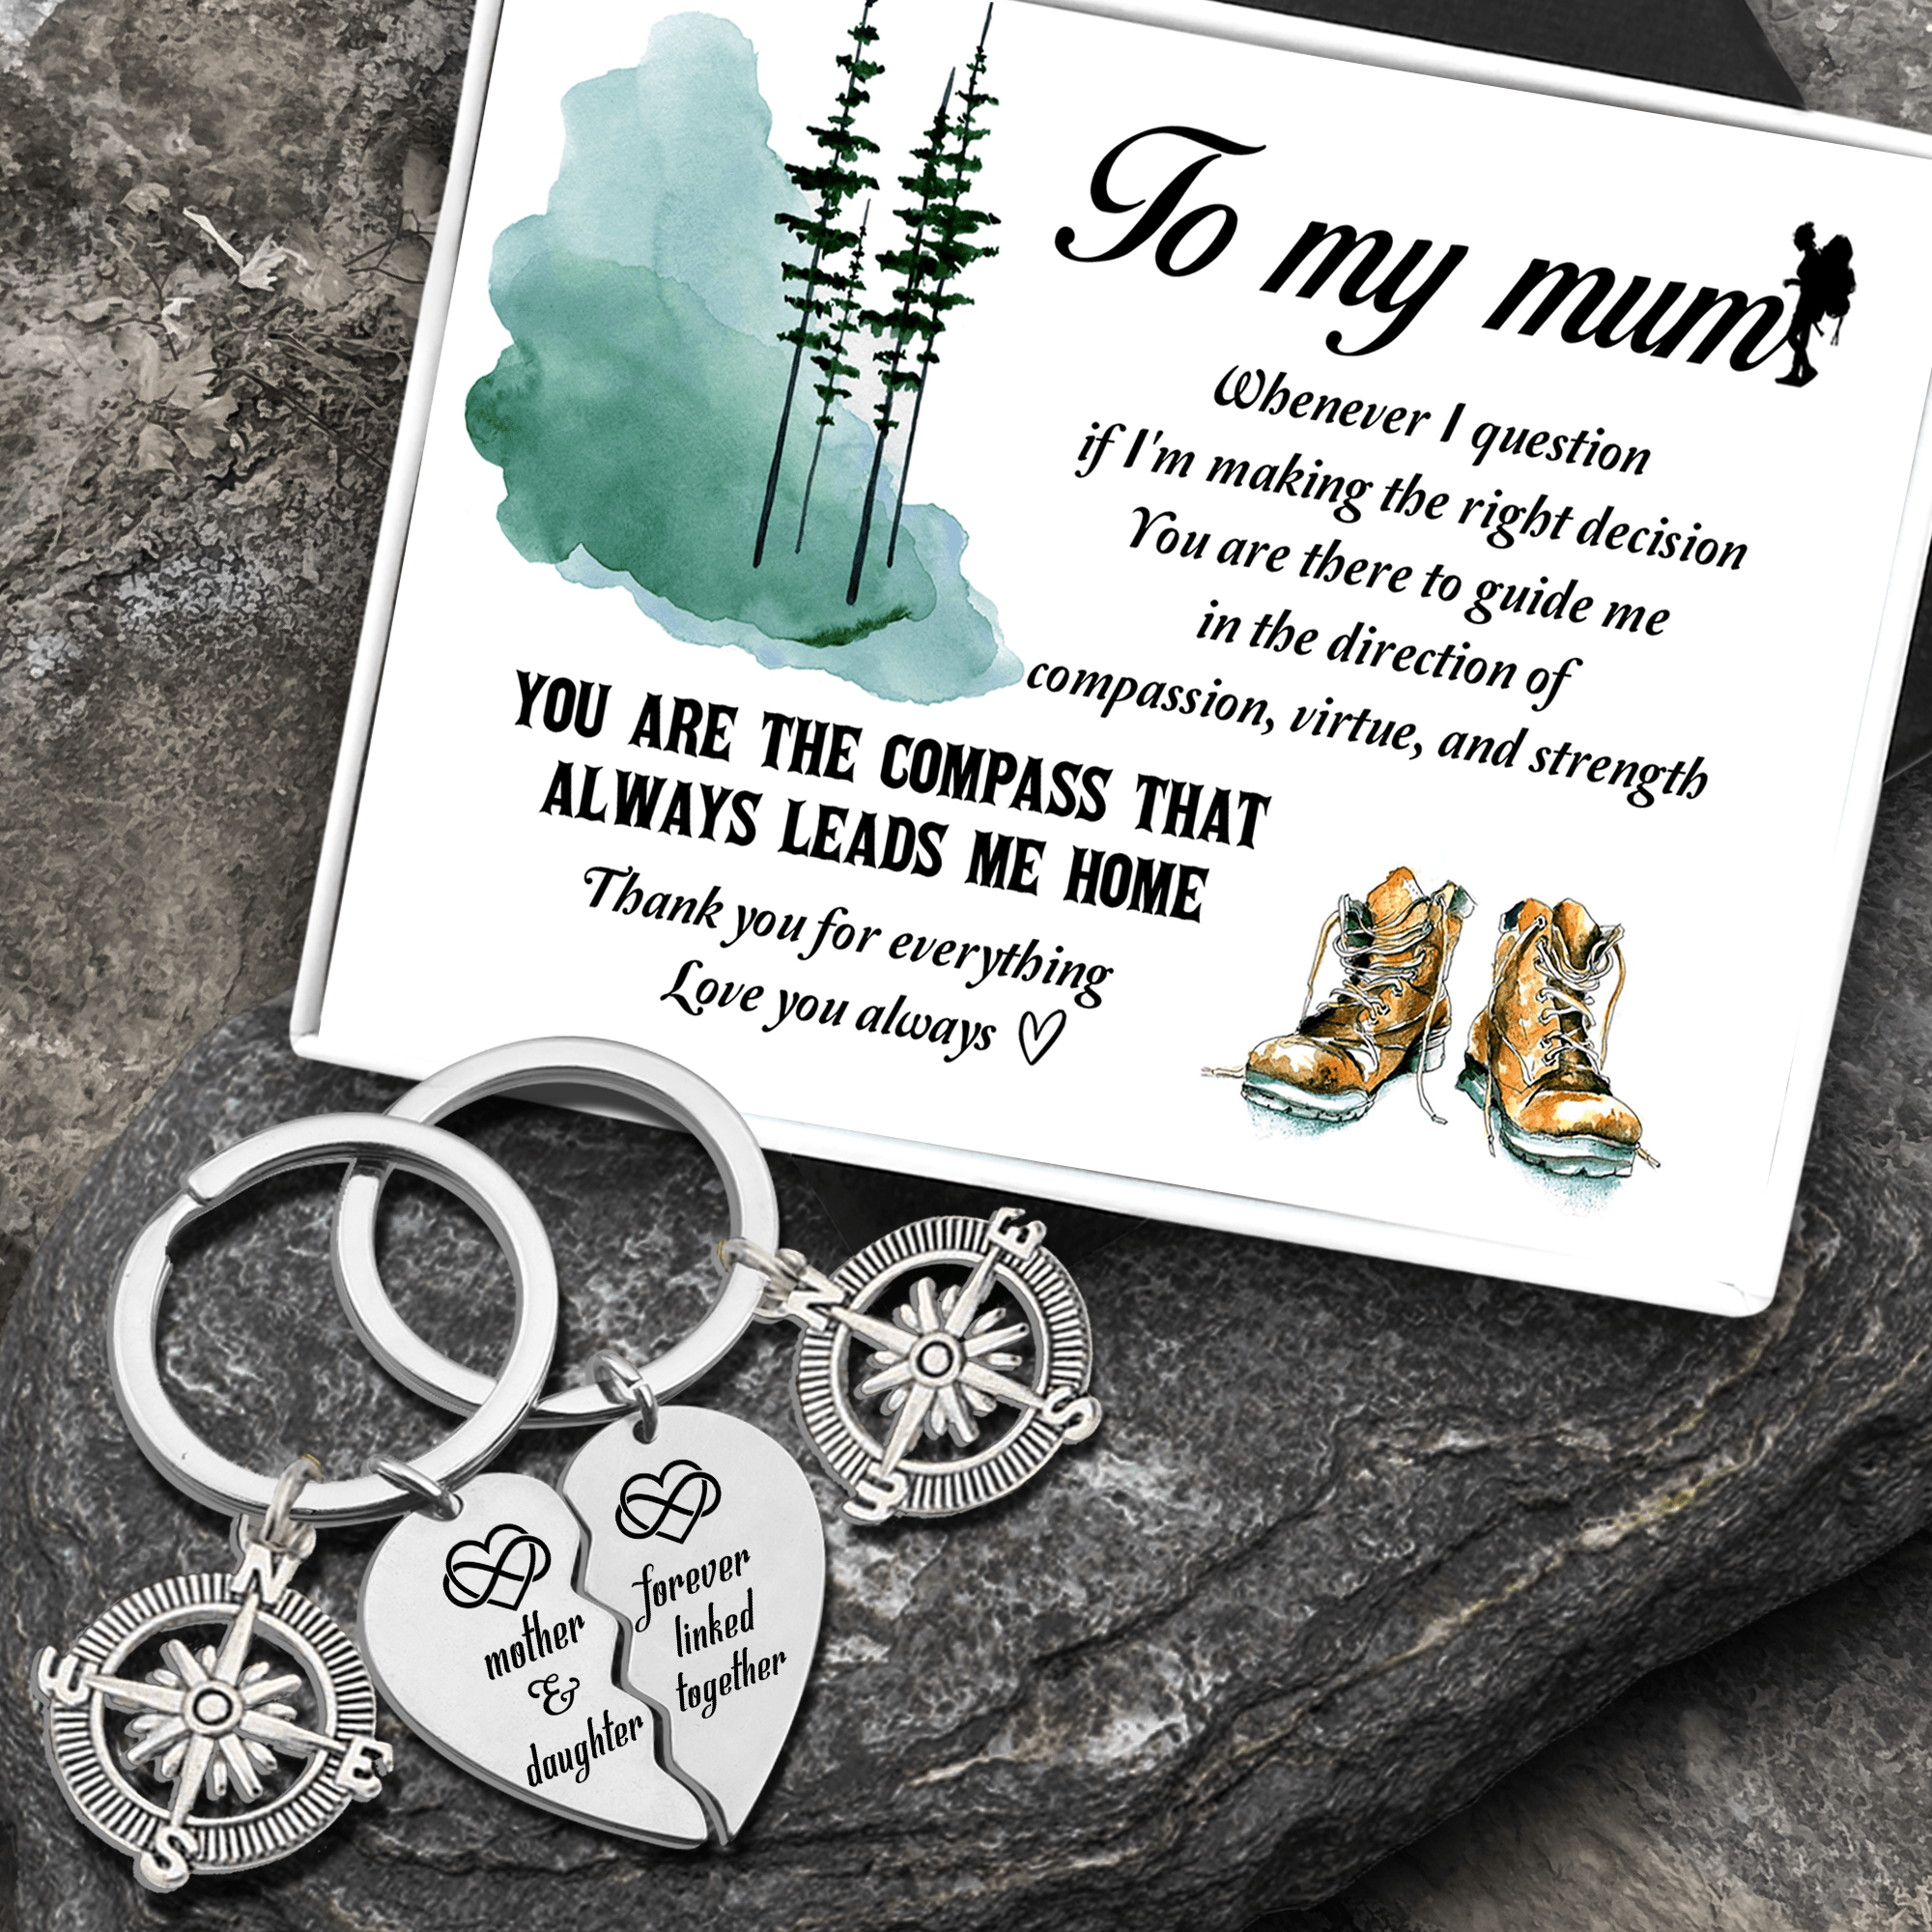 Compass Puzzle Keychains - Hiking - To My Mum - Love You Always - Augkdf19001 - Gifts Holder